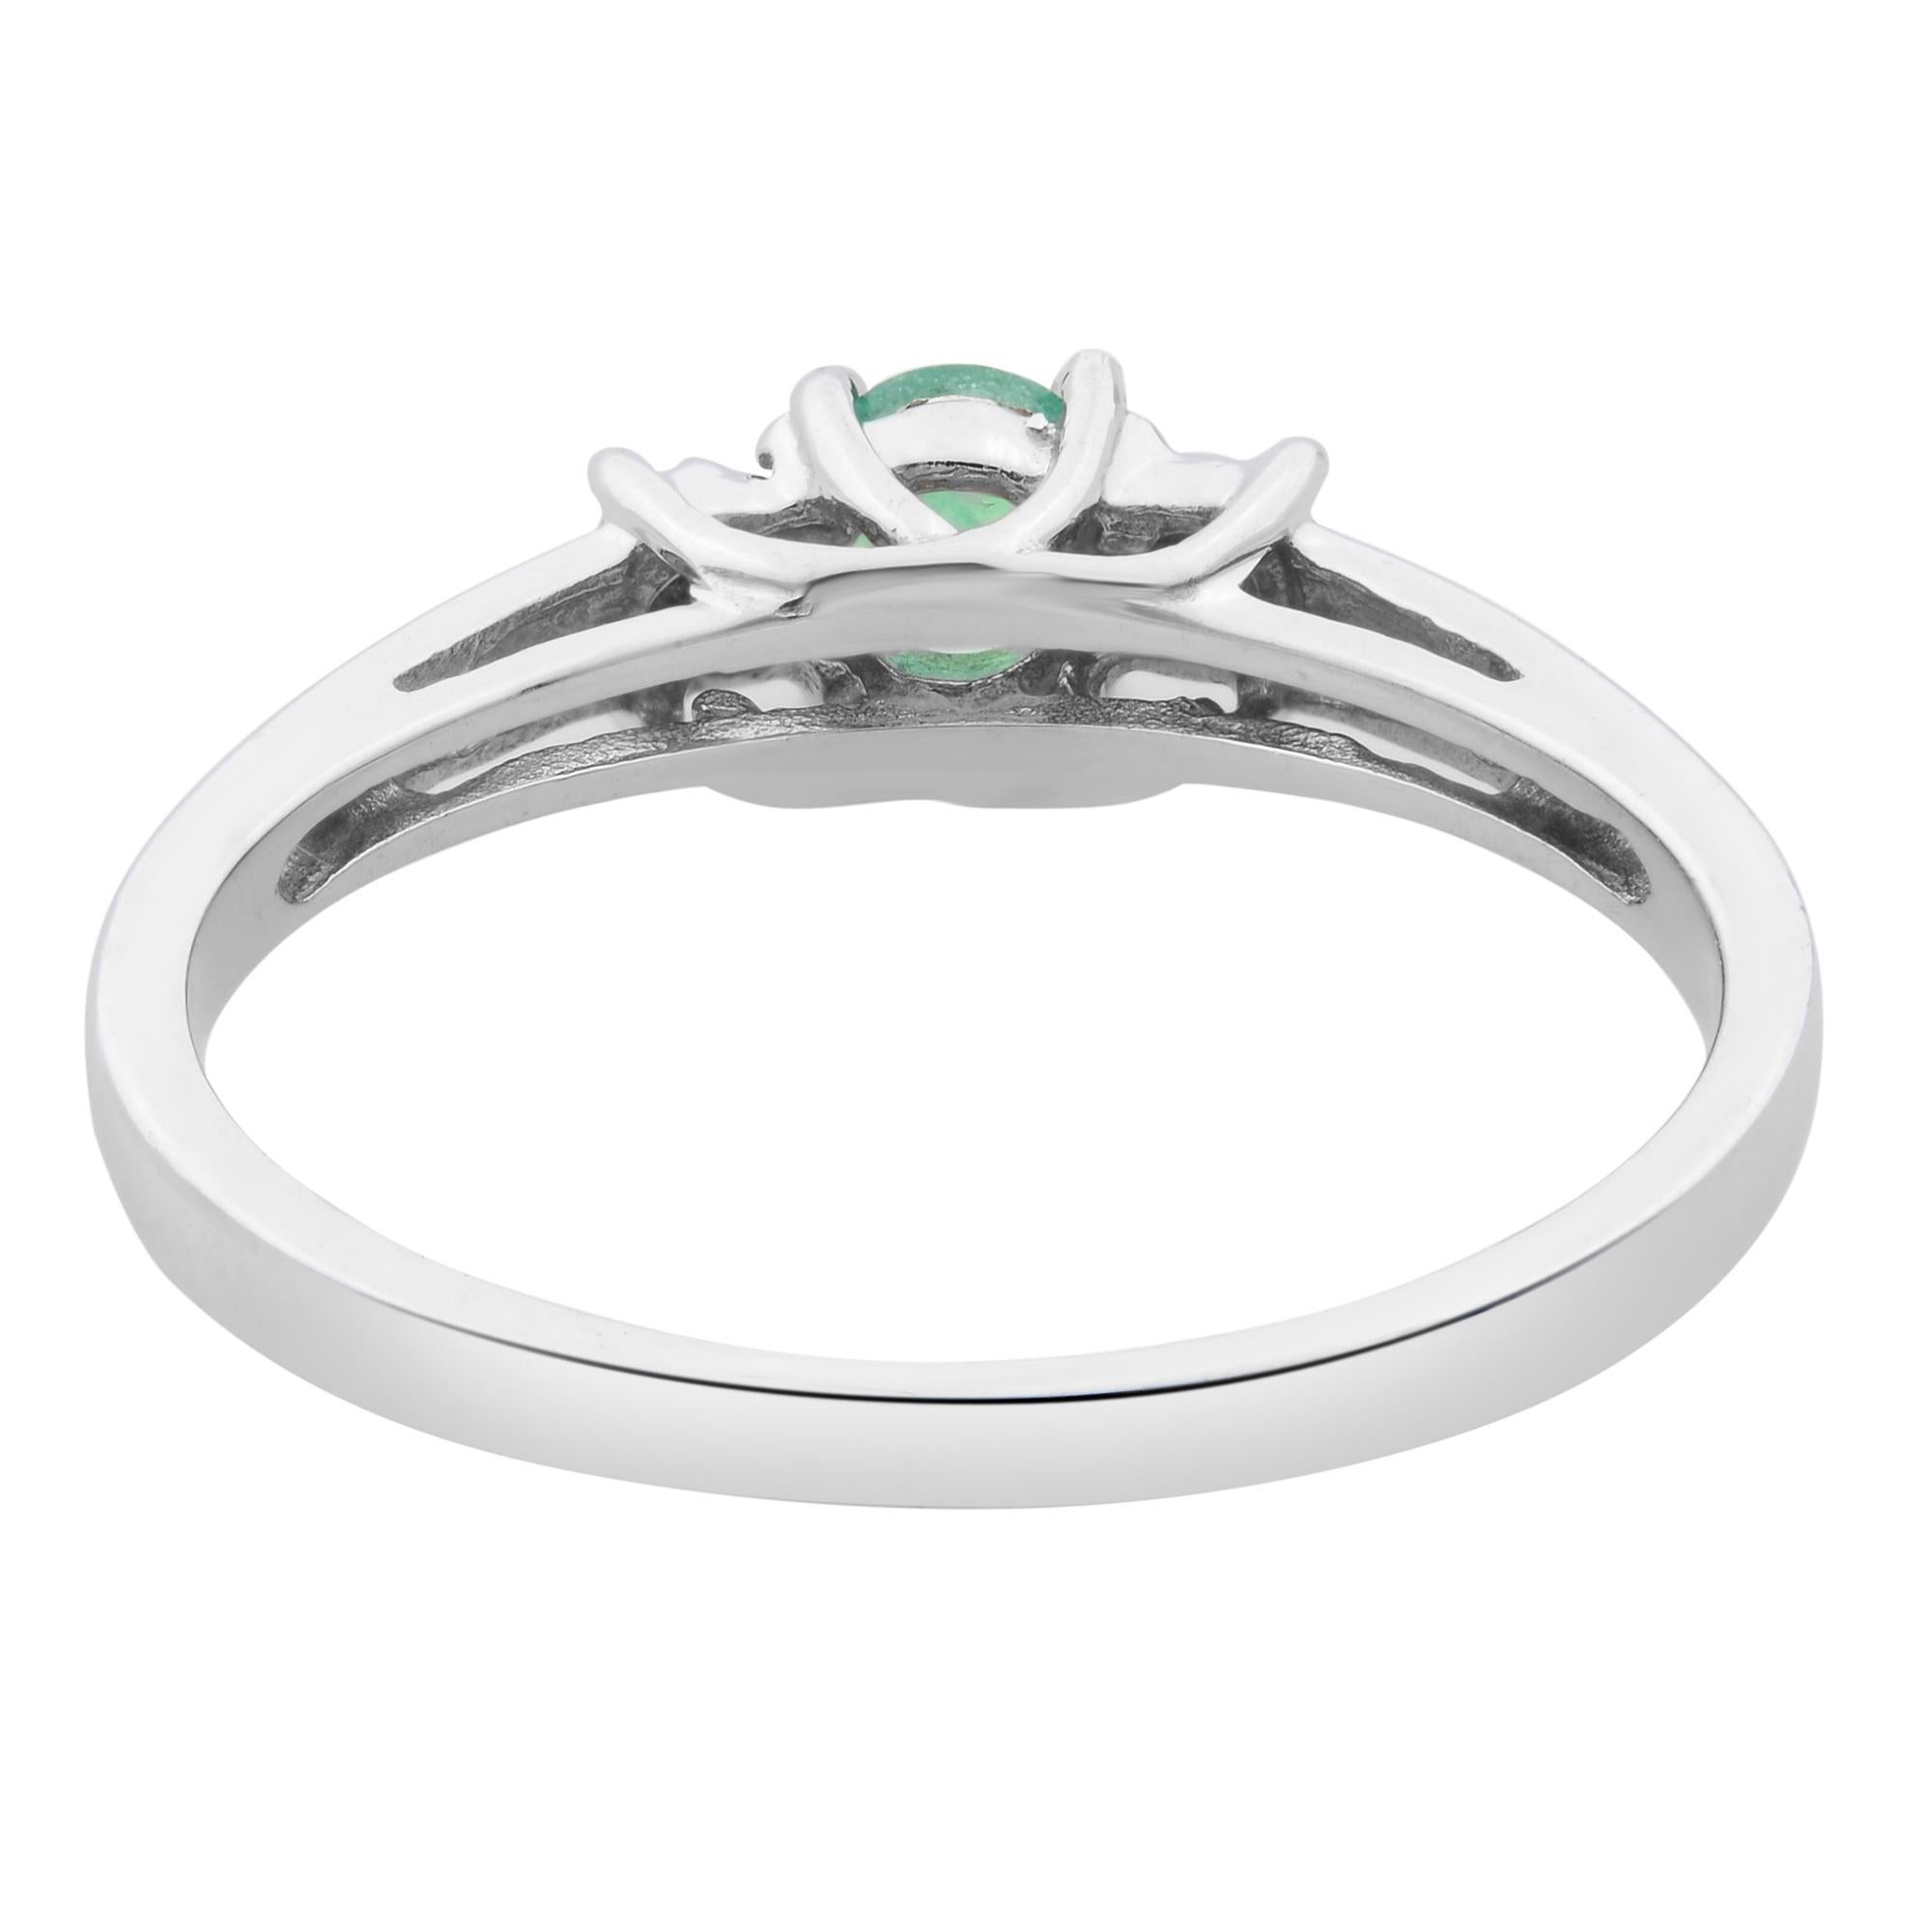 Rachel Koen 14K White Gold Emerald 0.25cttw Diamond 0.02cttw Ladies Ring SZ7 In New Condition For Sale In New York, NY